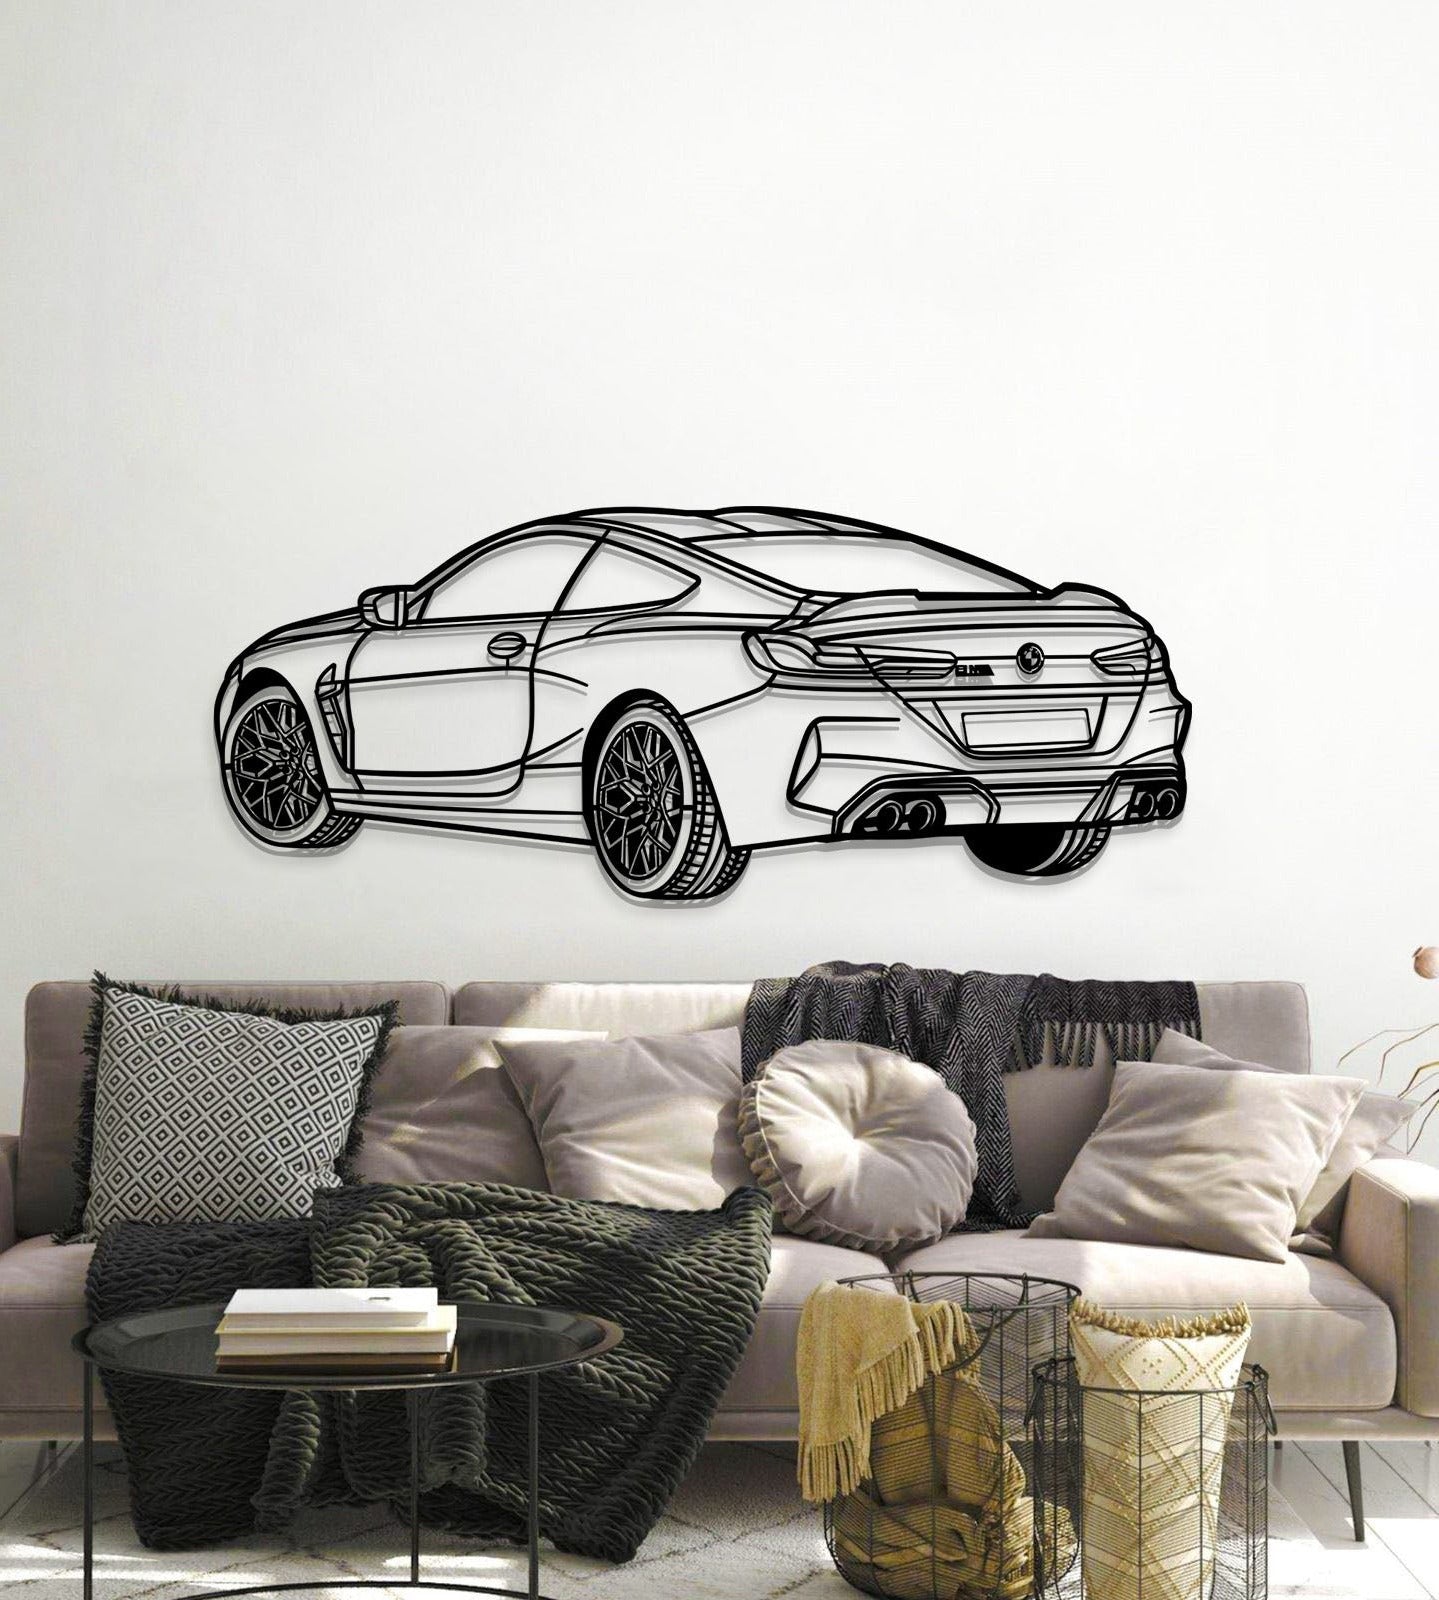 2020 M8 Competition Perspective Metal Car Wall Art - MT1144